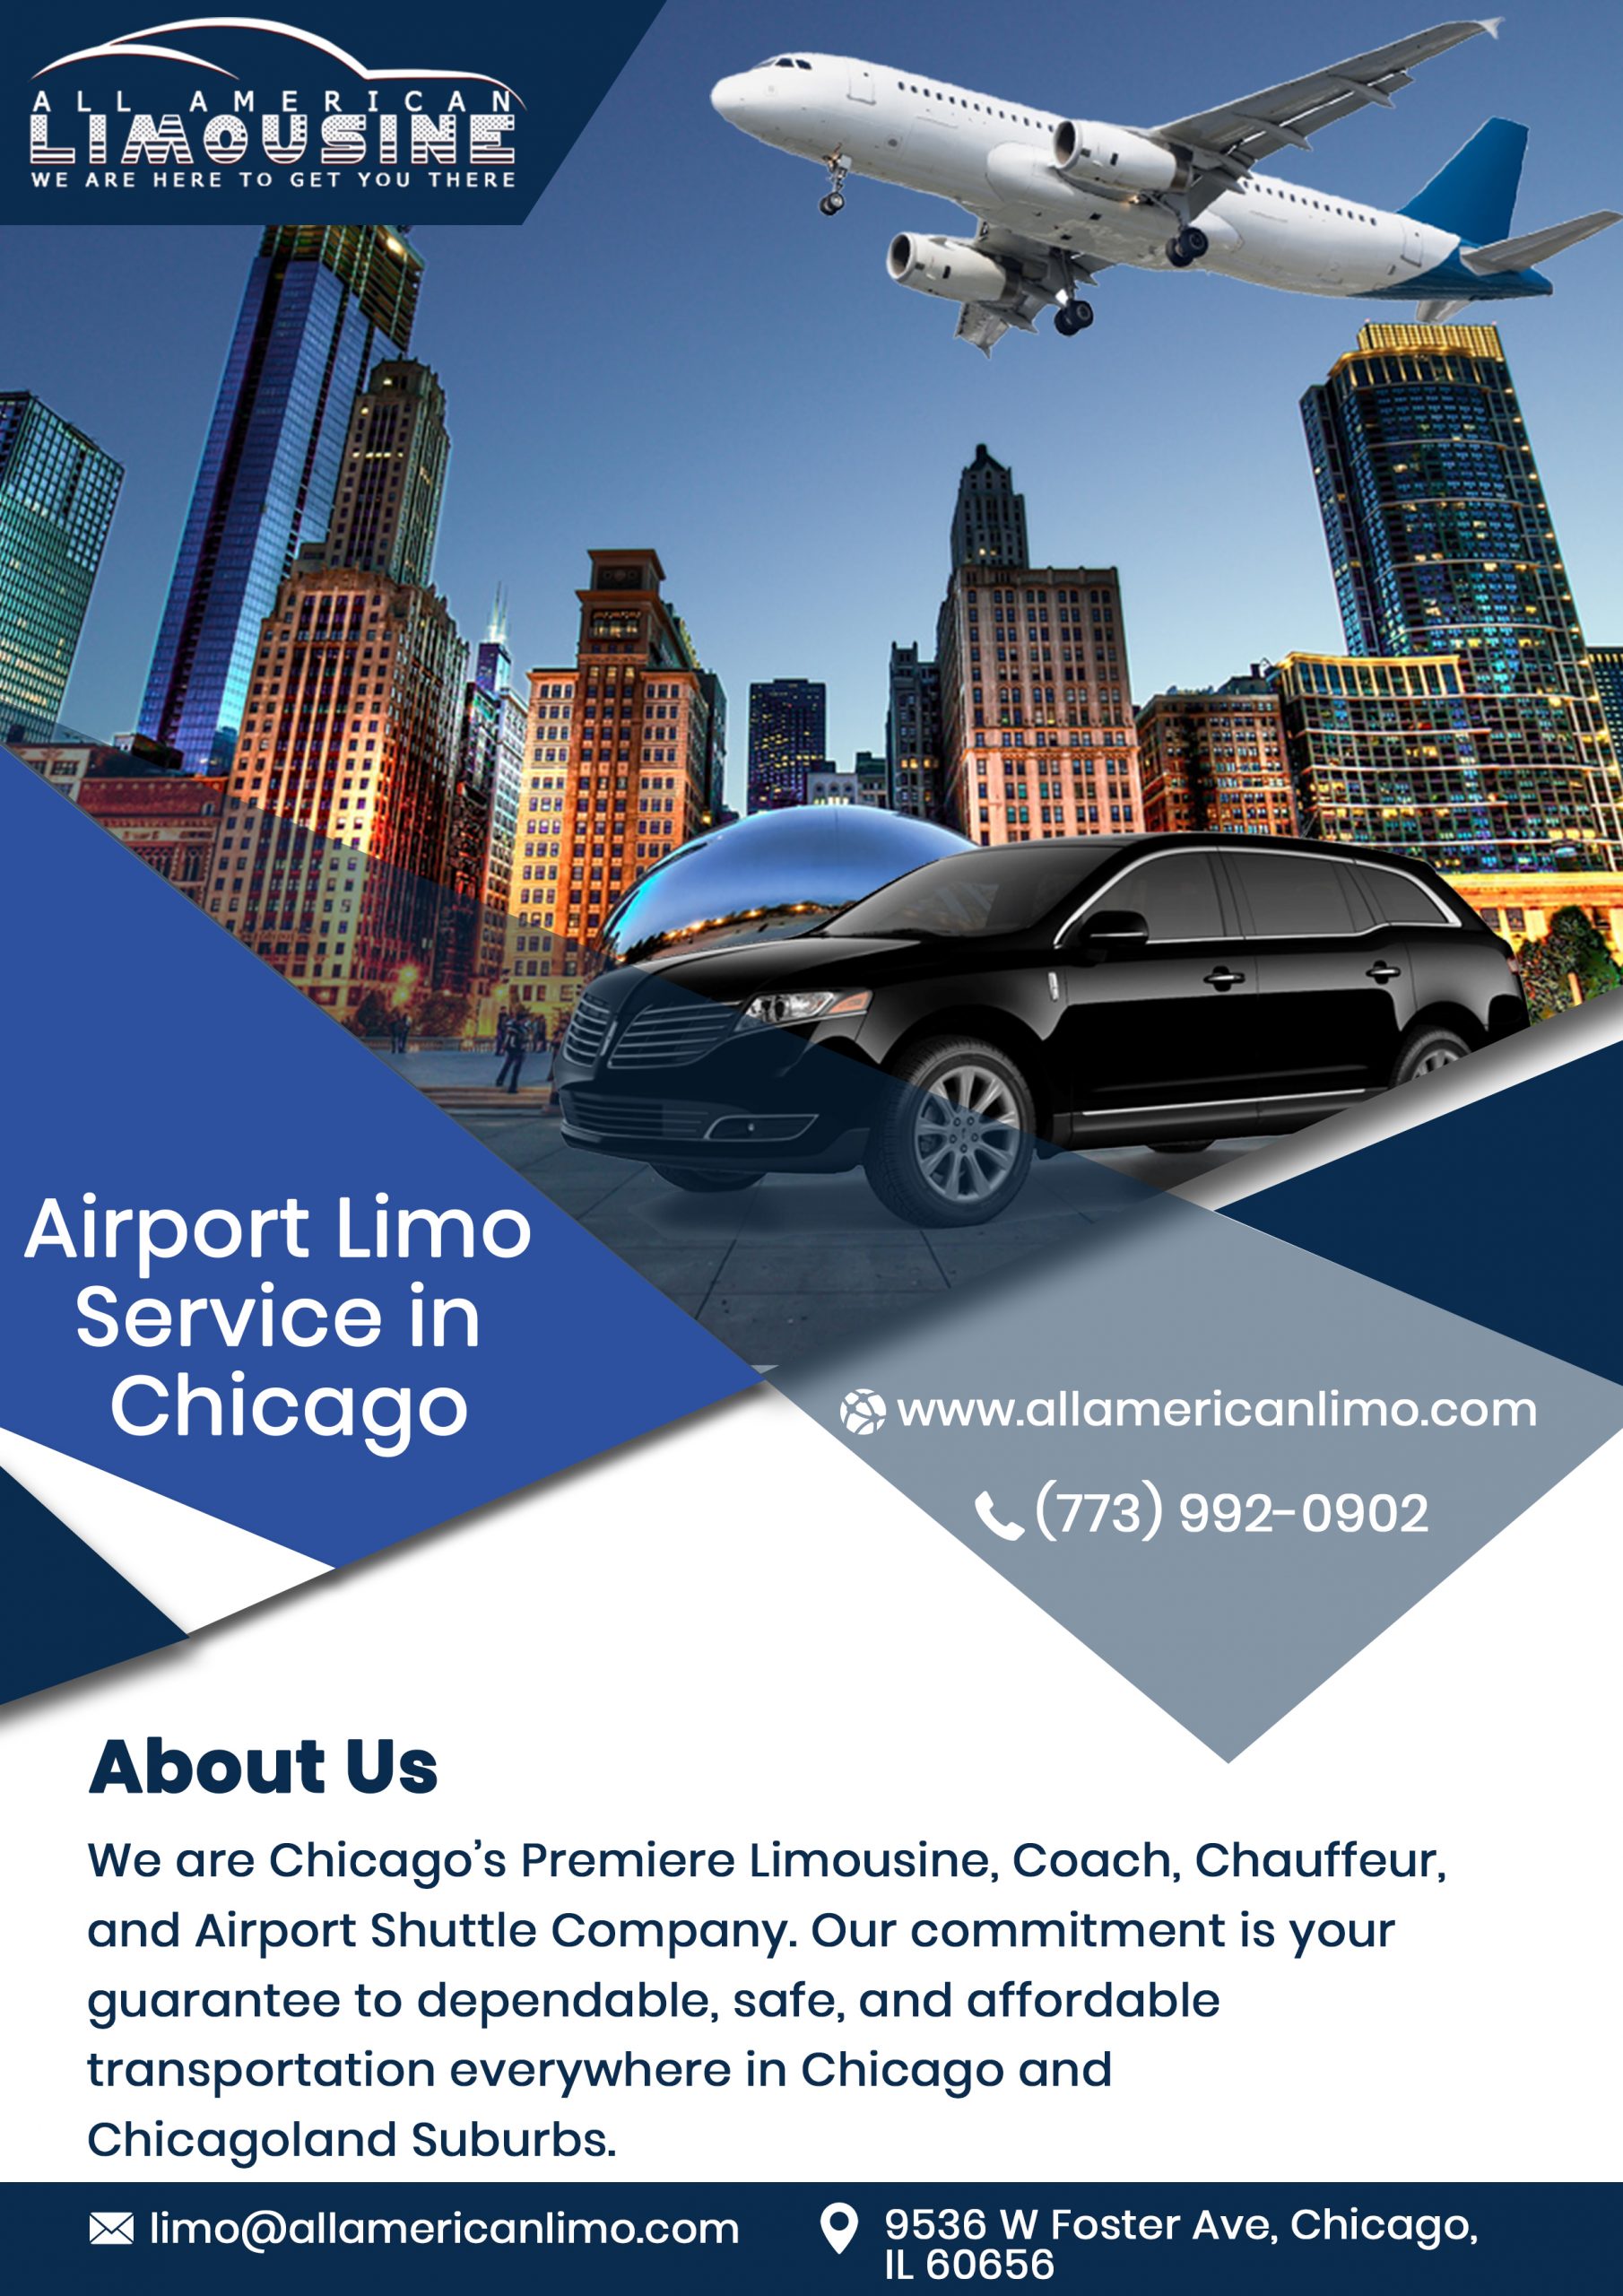 Chicago Car Service Near Me 60630, Party Bus 60630, Mercedes Sprinter Limo to 60630, Chicago Limo 60630, Limo Service 60630 to Airport, Hire, Rent, Get, Find, Car Service 60630 to Airport, Transportation Service 60630 to O'Hare, Corporate Travel 60630, Airport Travel 60630